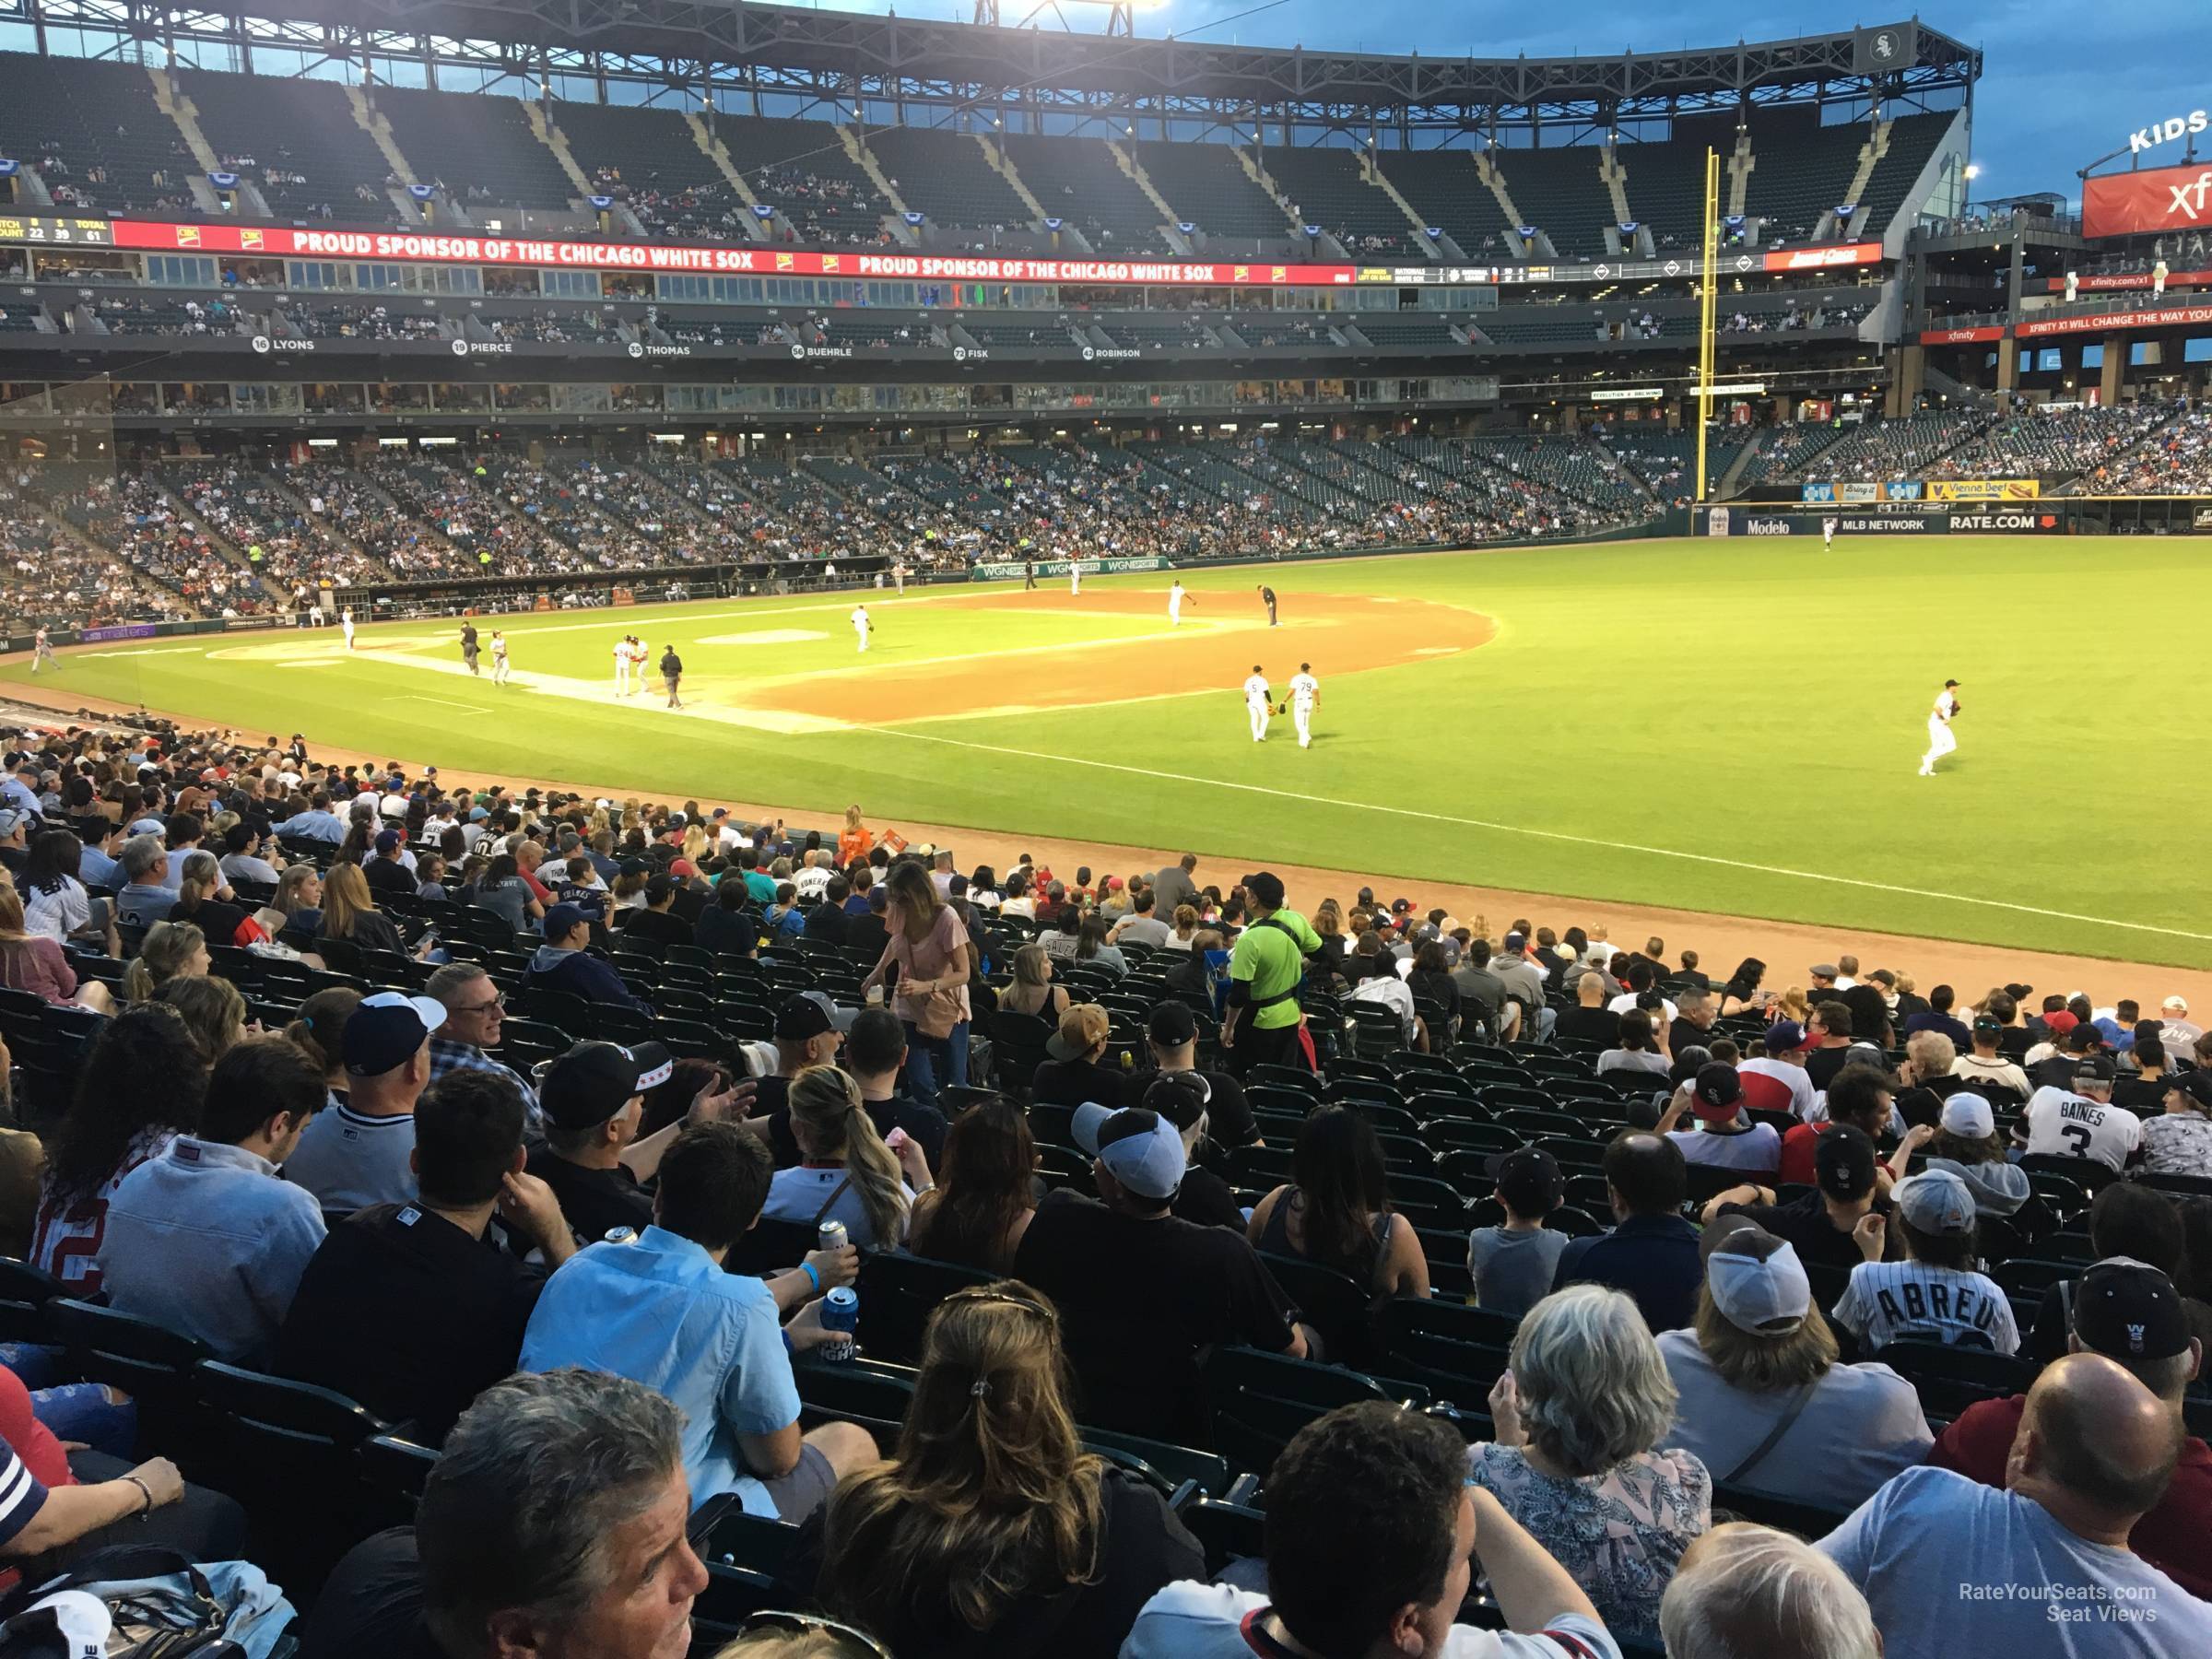 section 115, row 24 seat view  - guaranteed rate field